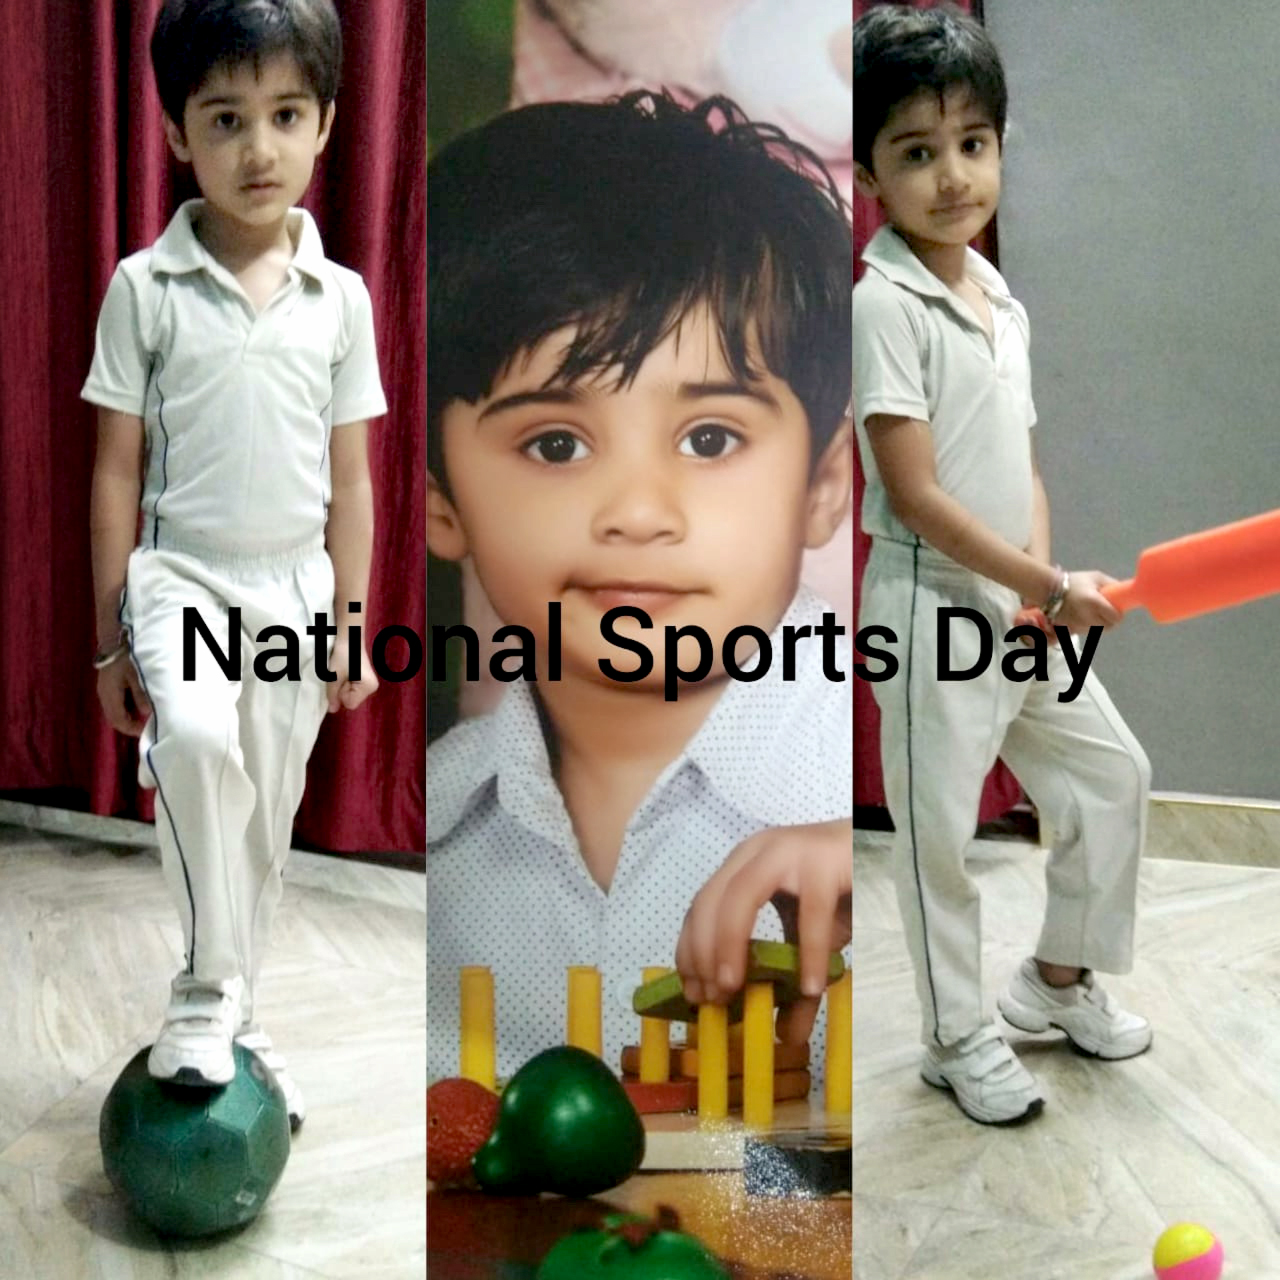 NATIONAL SPORTS DAY 2020